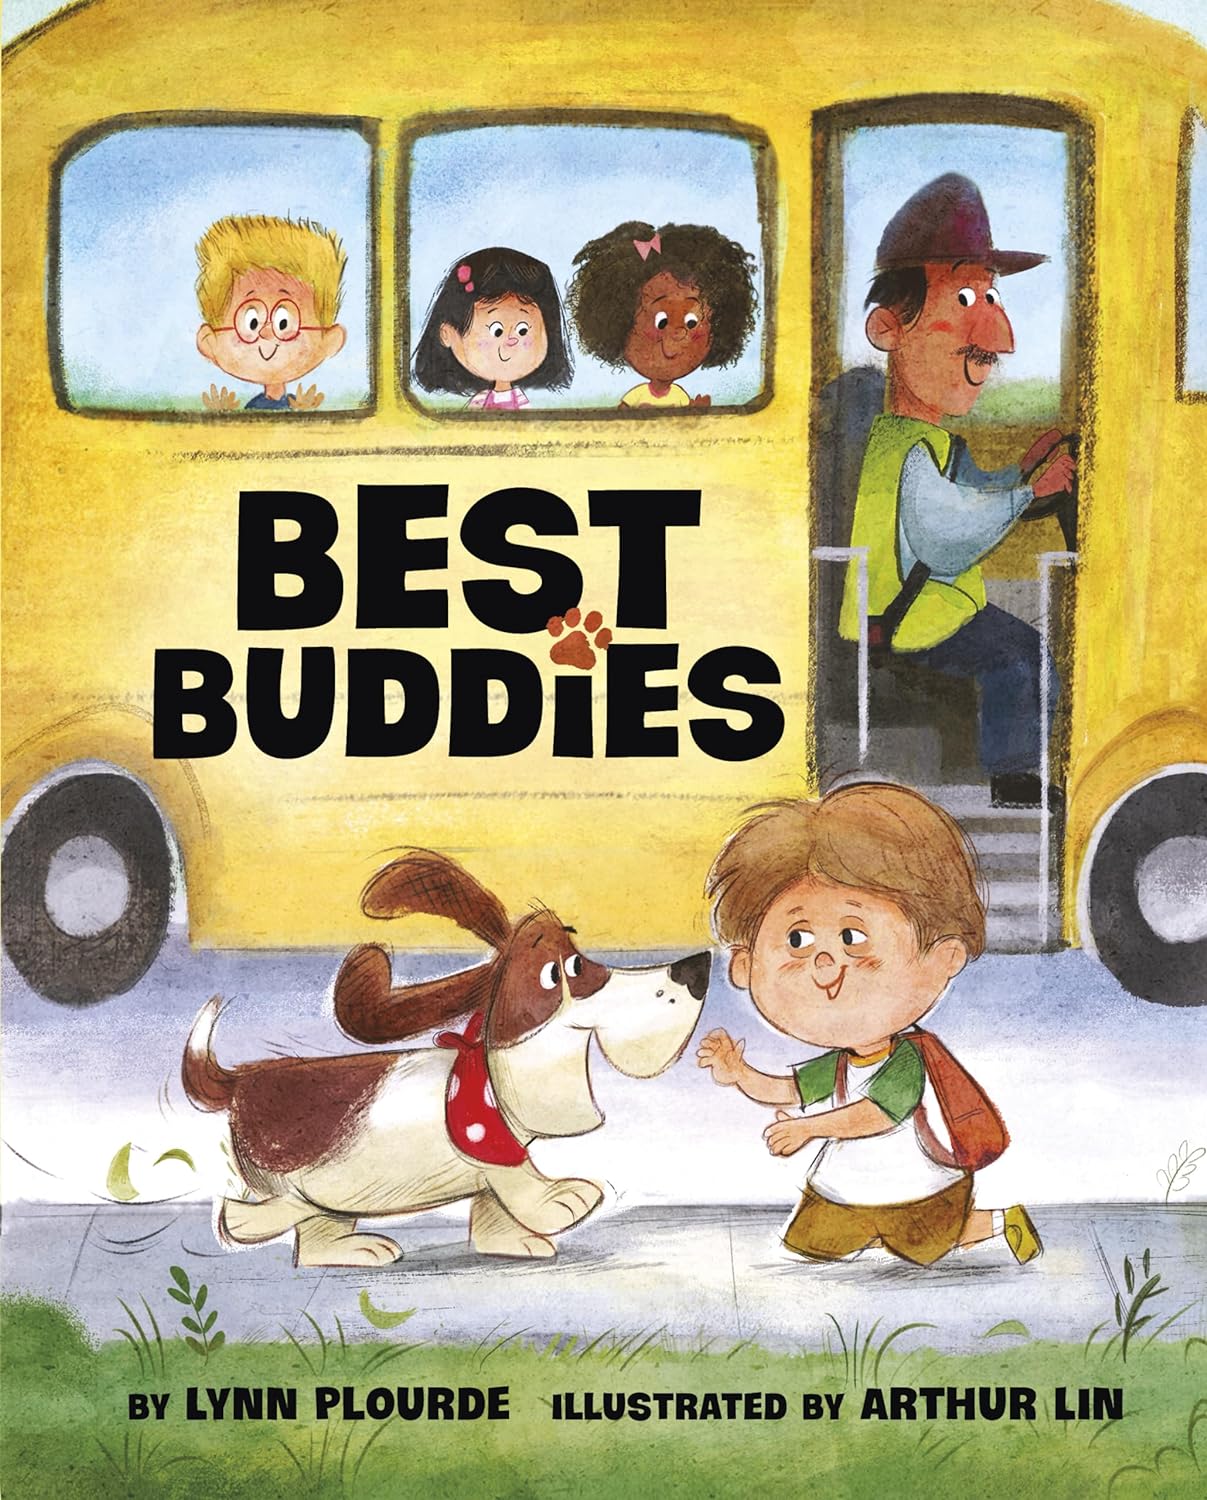 Best buddies is a heartwarming novel by Lynn Floyd that explores the deep bond between characters, including those who are neurodiverse or disabled.